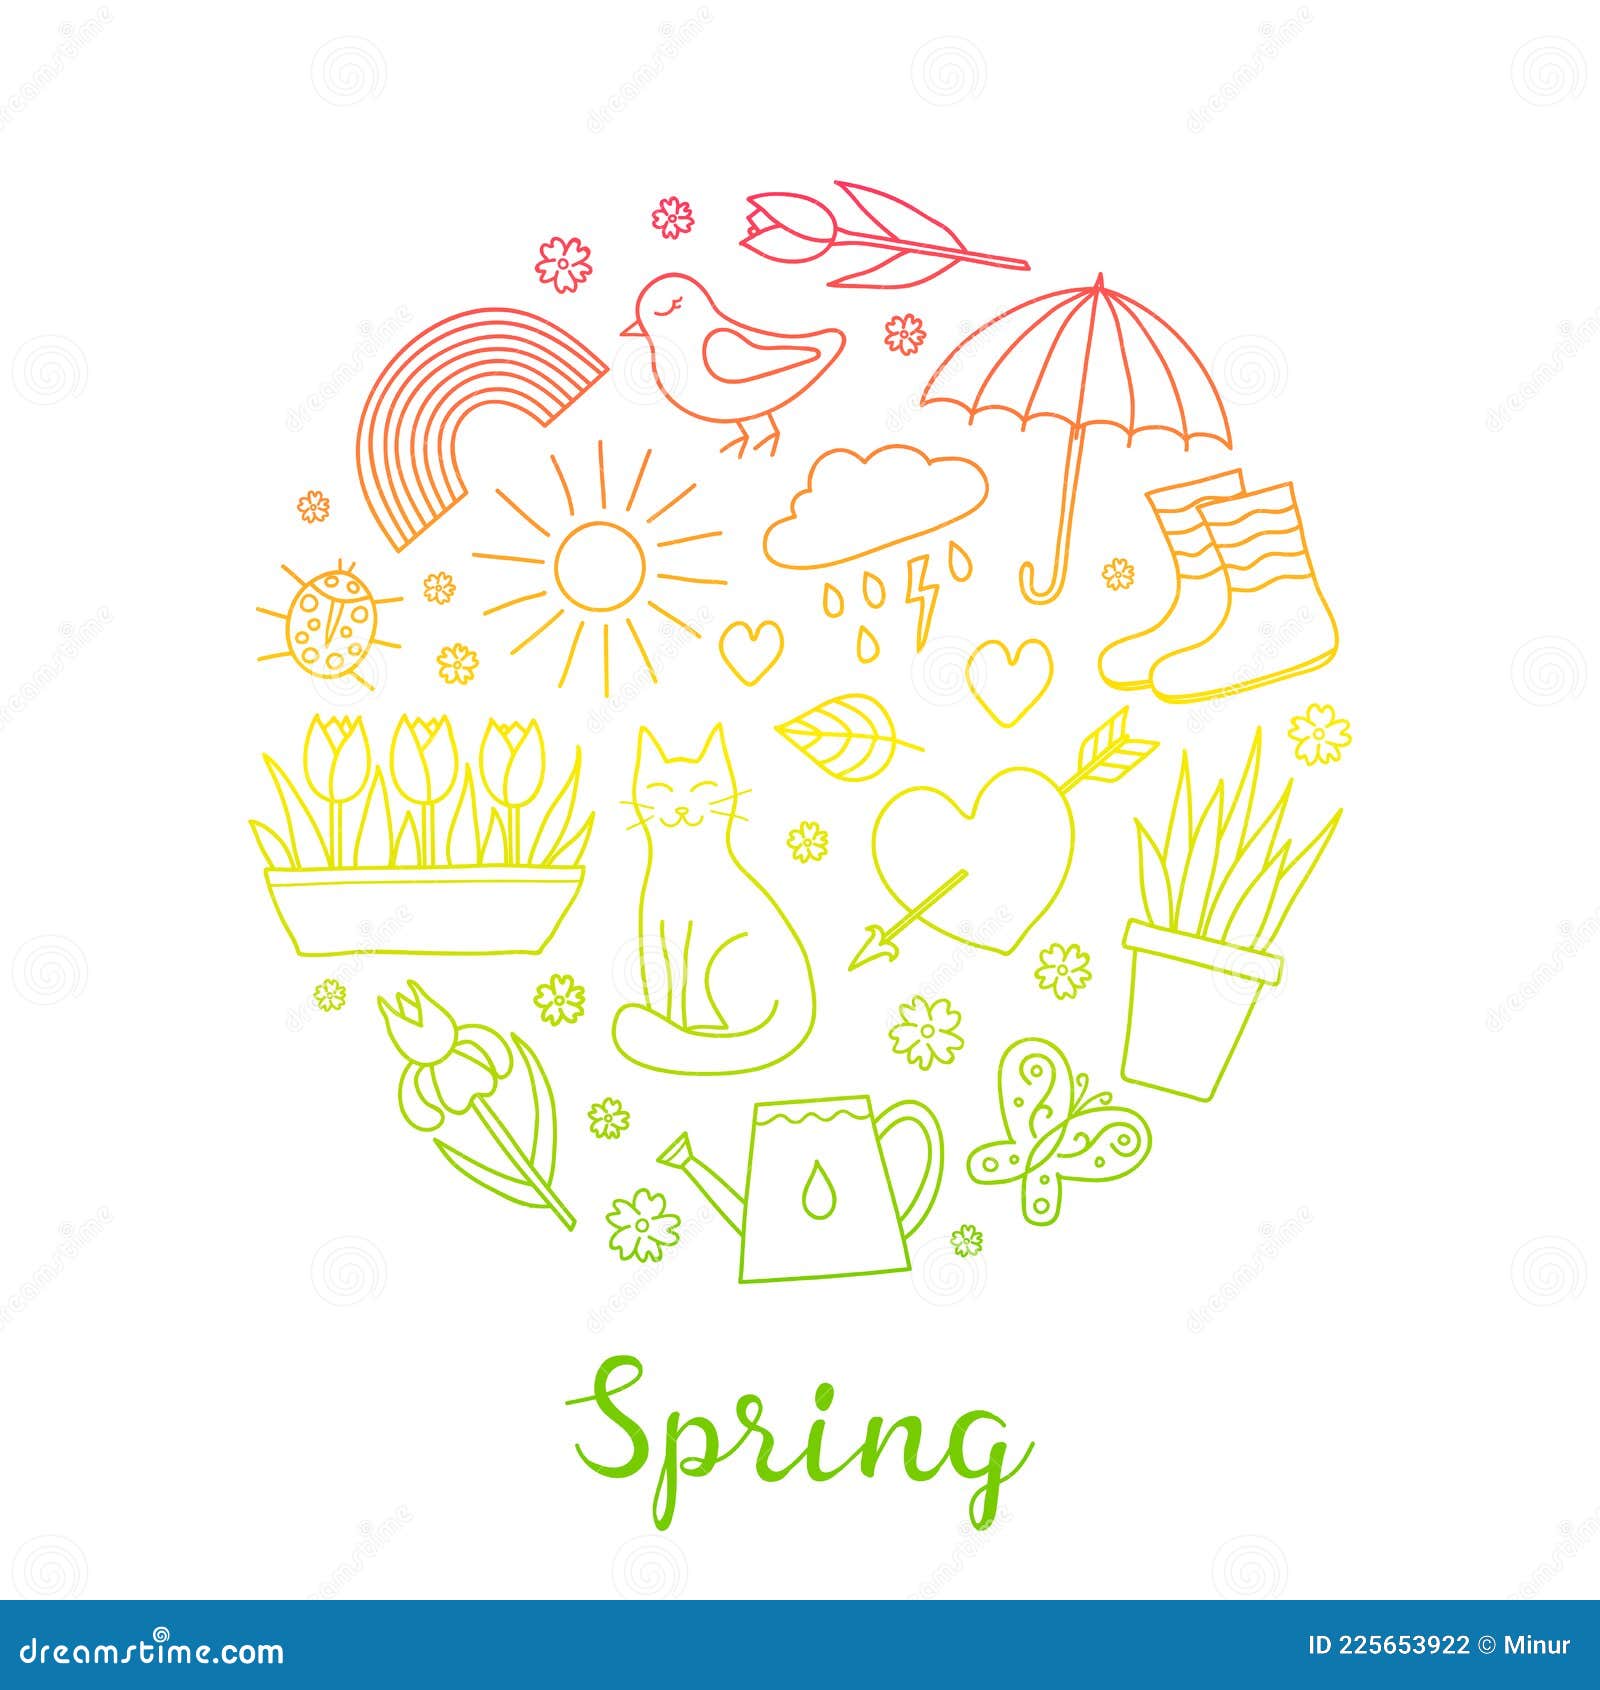 Hand Drawn Spring Items In Circle Stock Vector Illustration Of